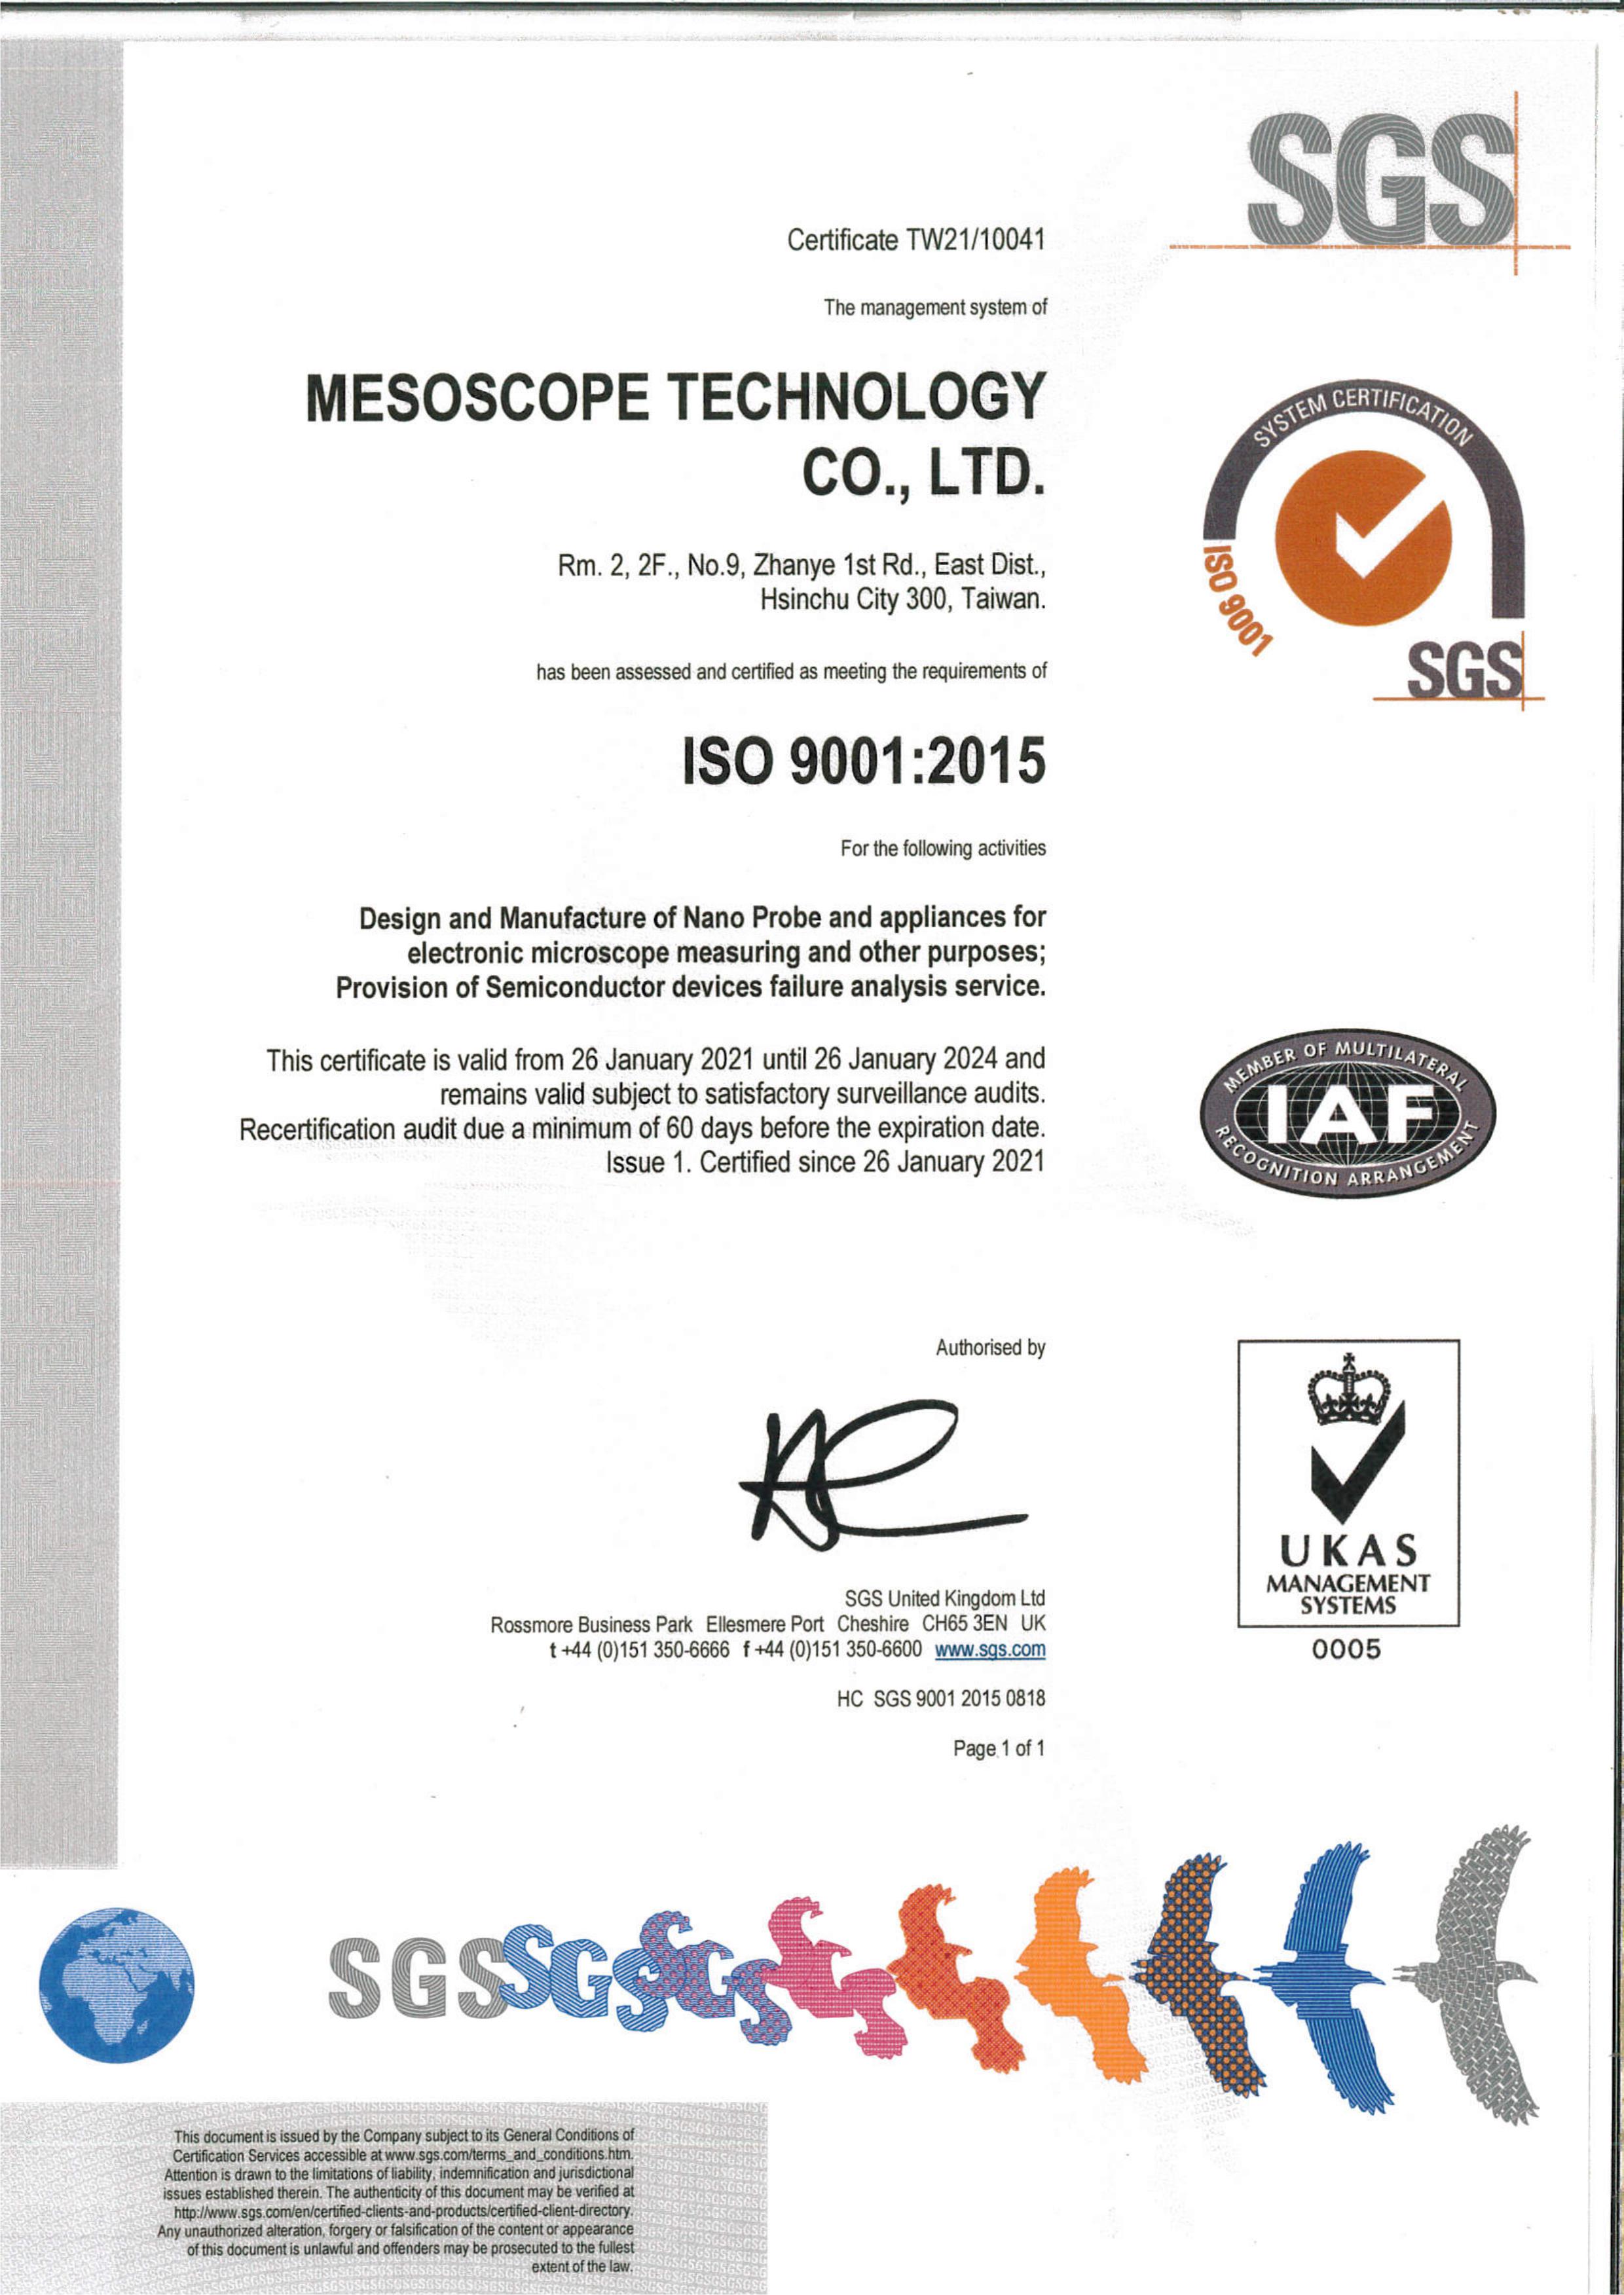 MESOSCOPE is certified to ISO 9001-2015